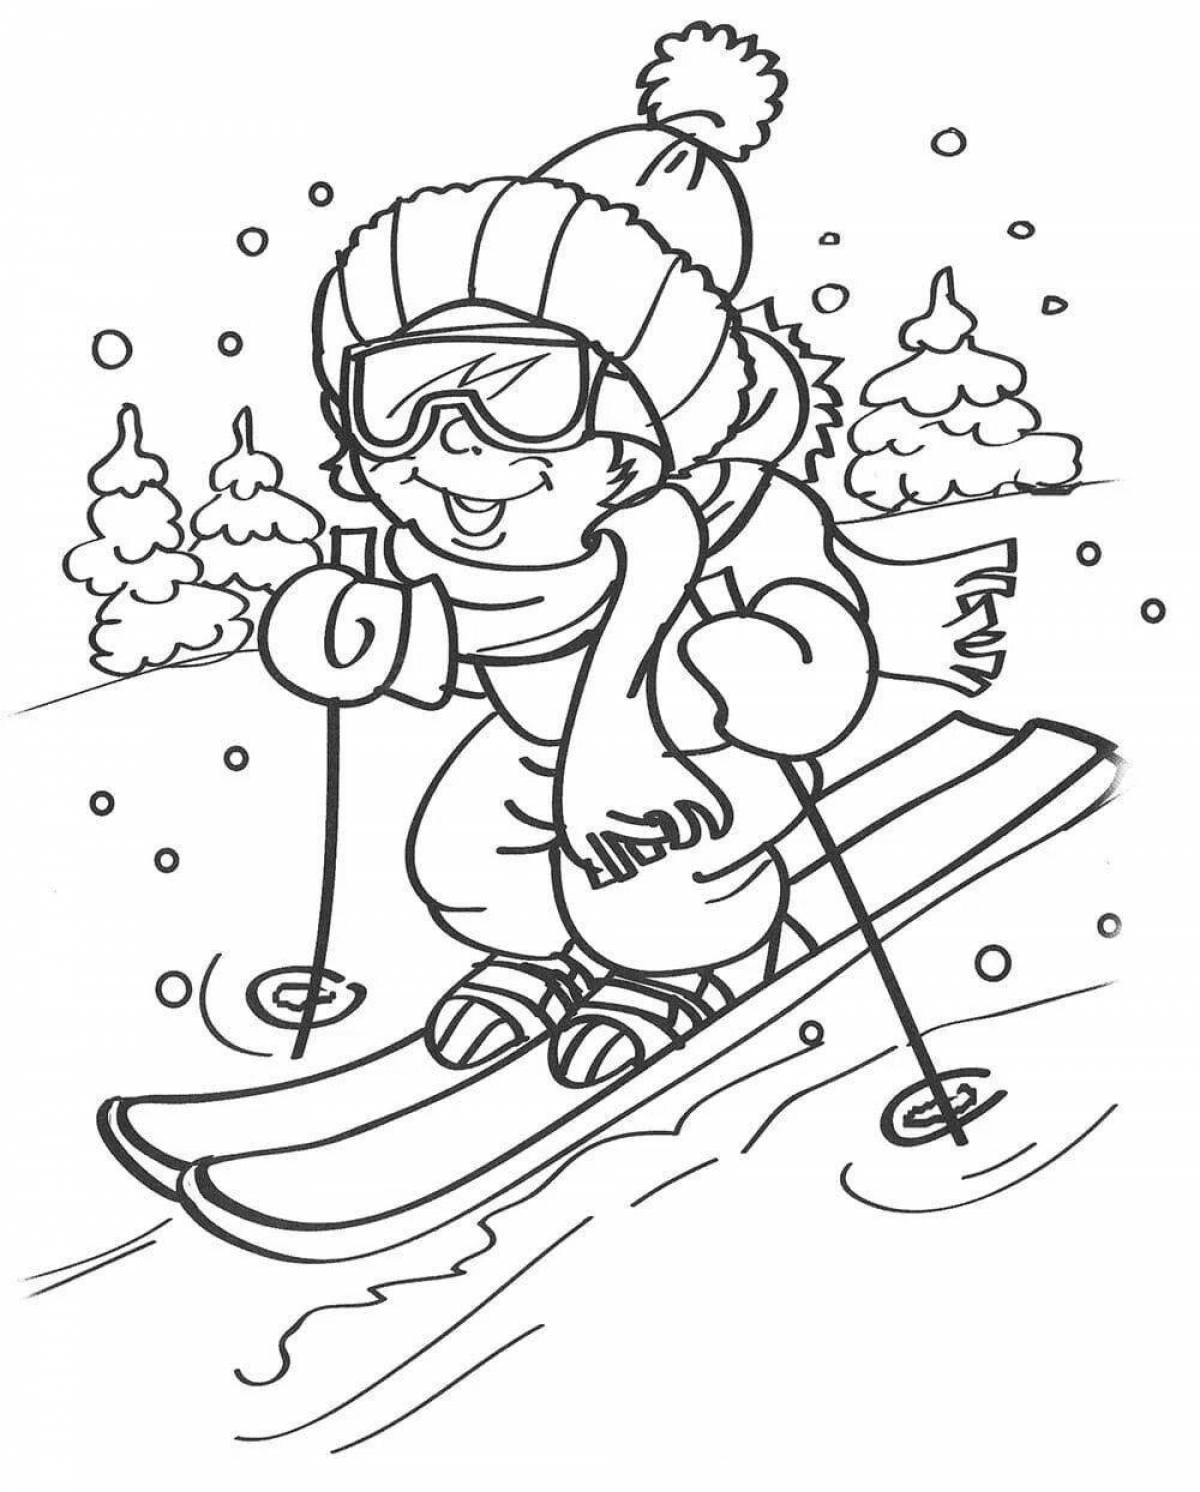 Inspirational skier coloring book for kids